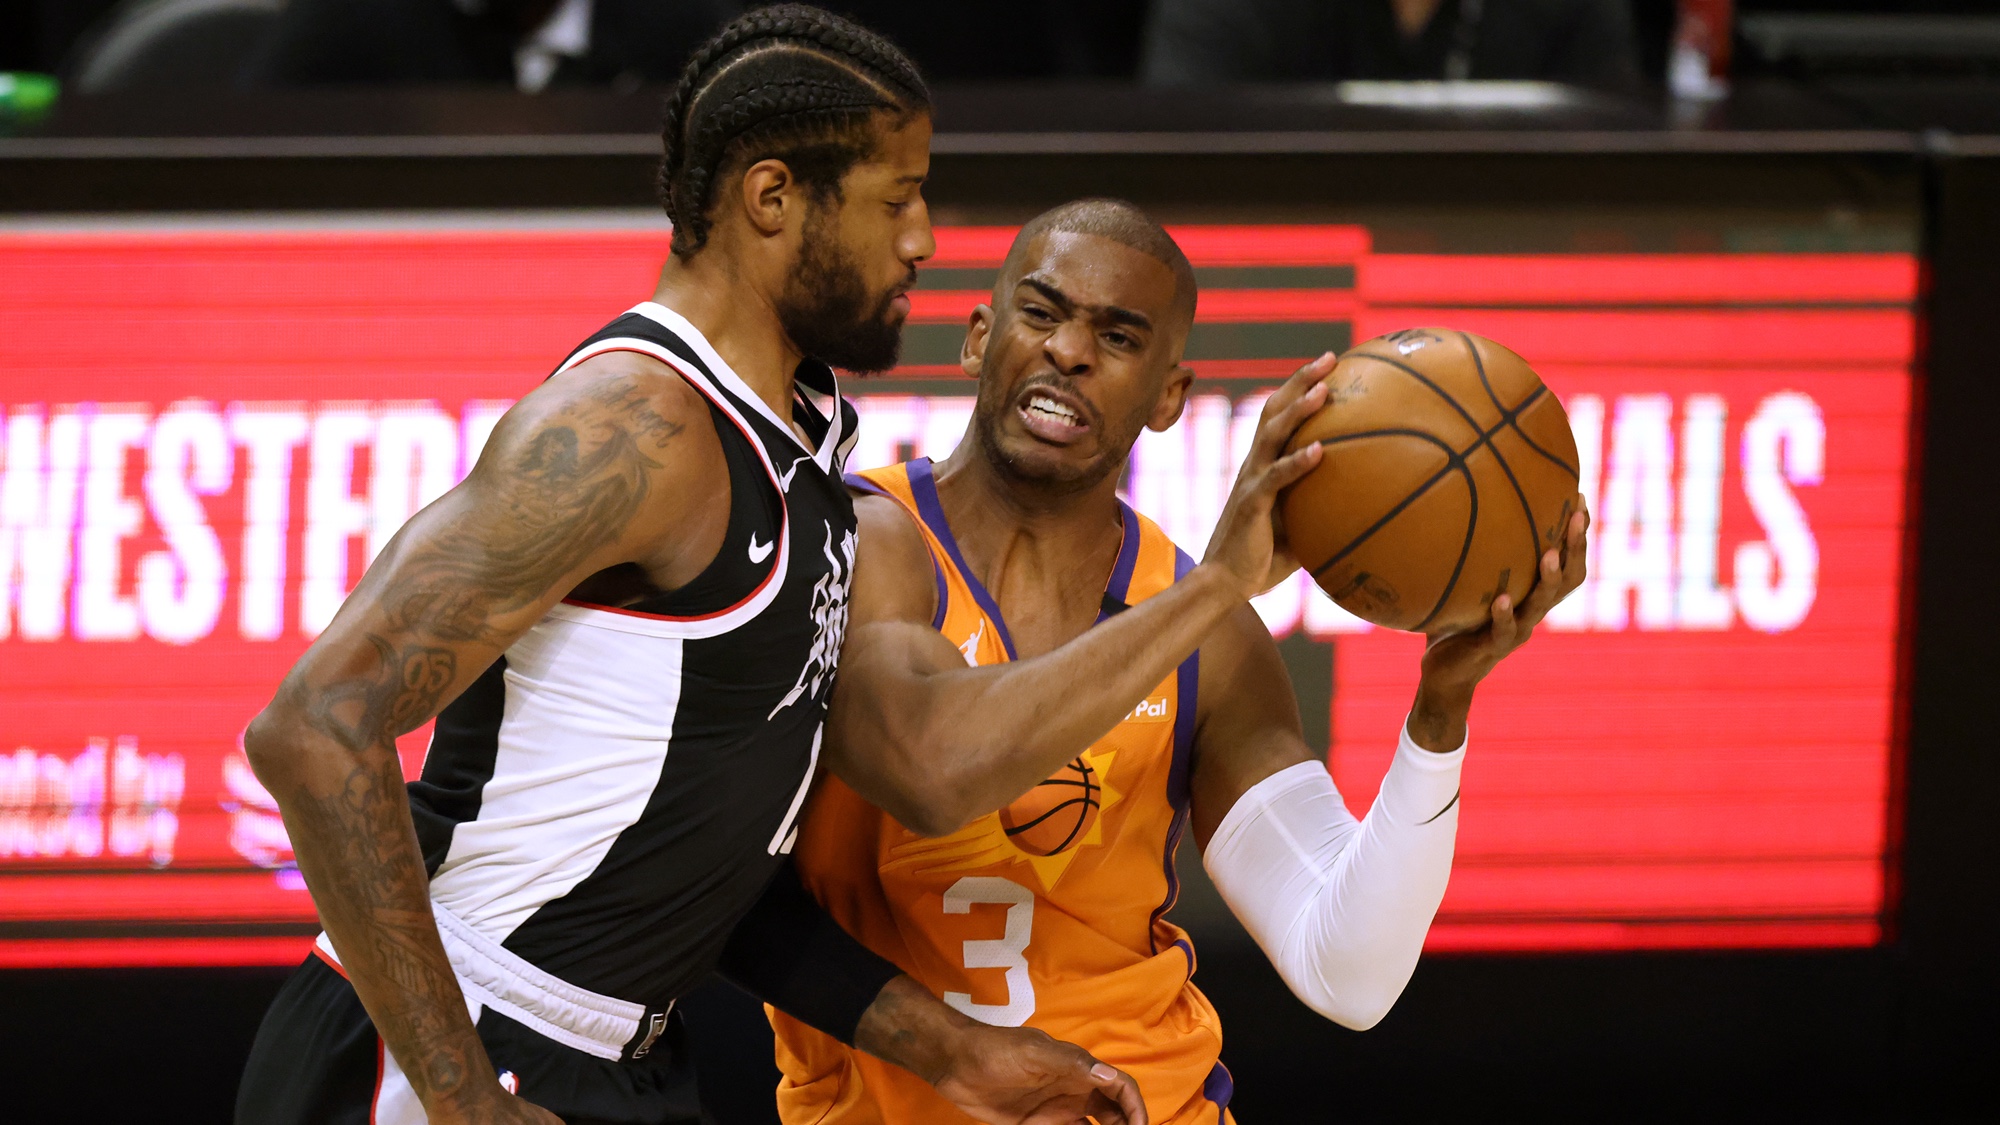 Phoenix Suns vs Los Angeles Clippers Live Stream Online Link 3